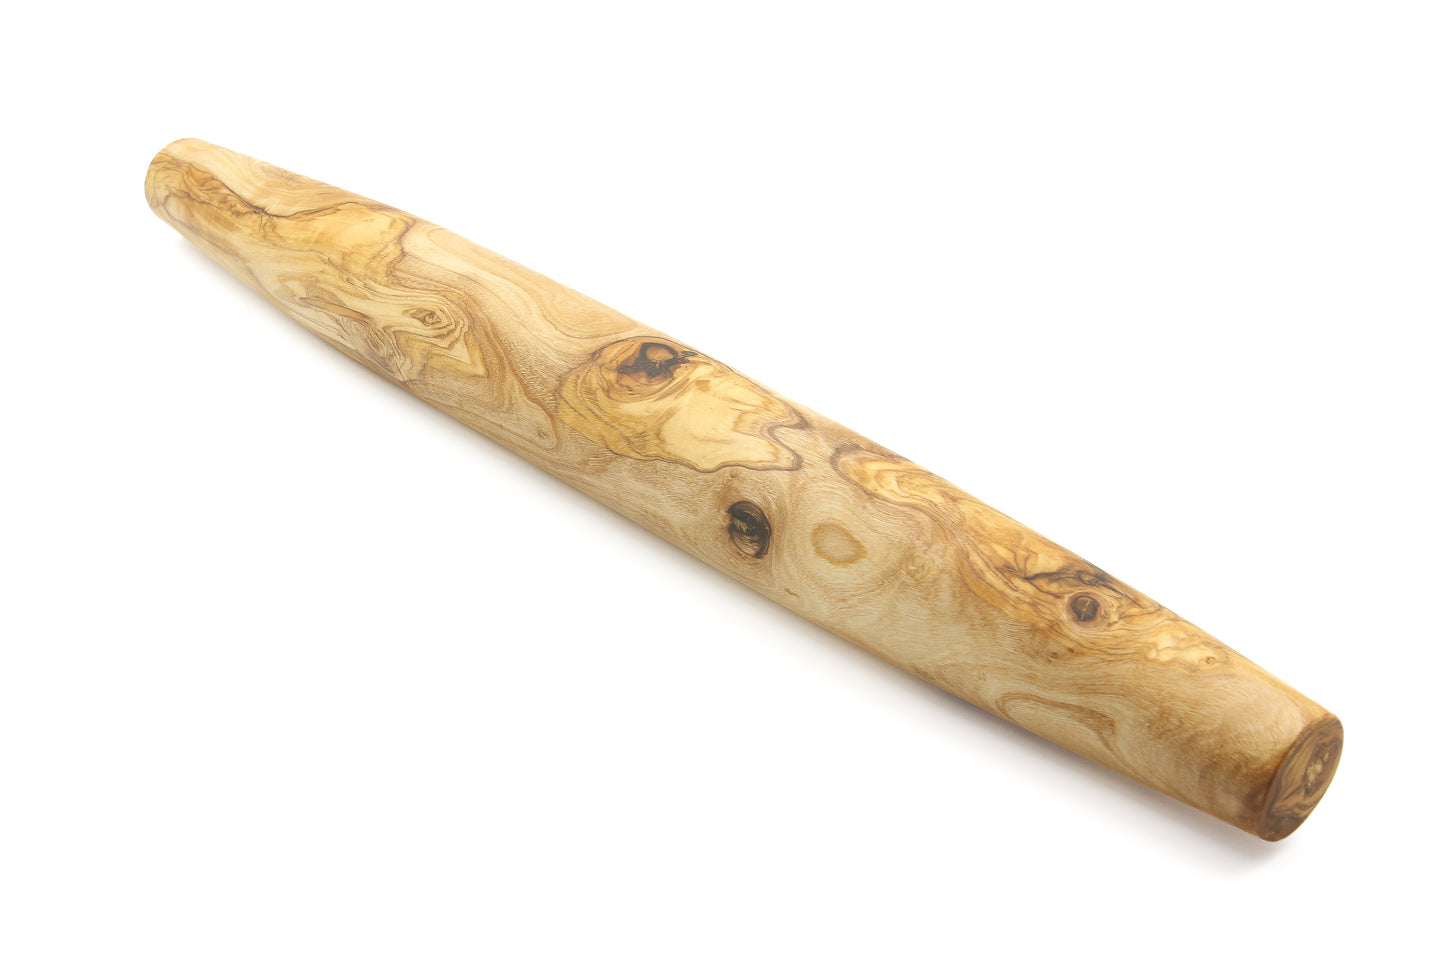 Vintage-style olive wood rolling pin